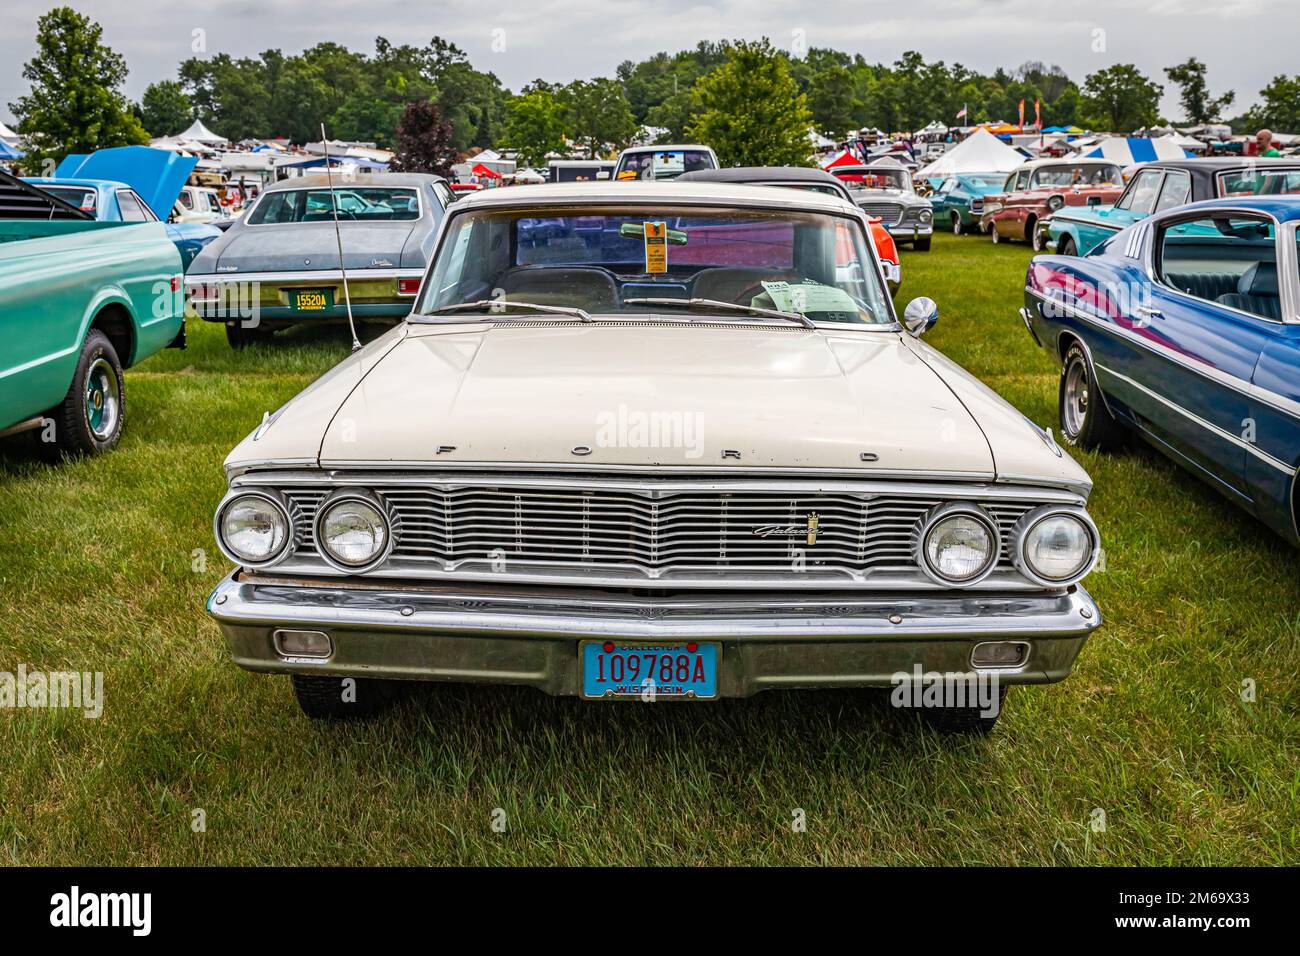 Iola, WI - July 07, 2022: High perspective front view of a 1964 Ford Galaxie 500 XL 2 Door Hardtop at a local car show. Stock Photo